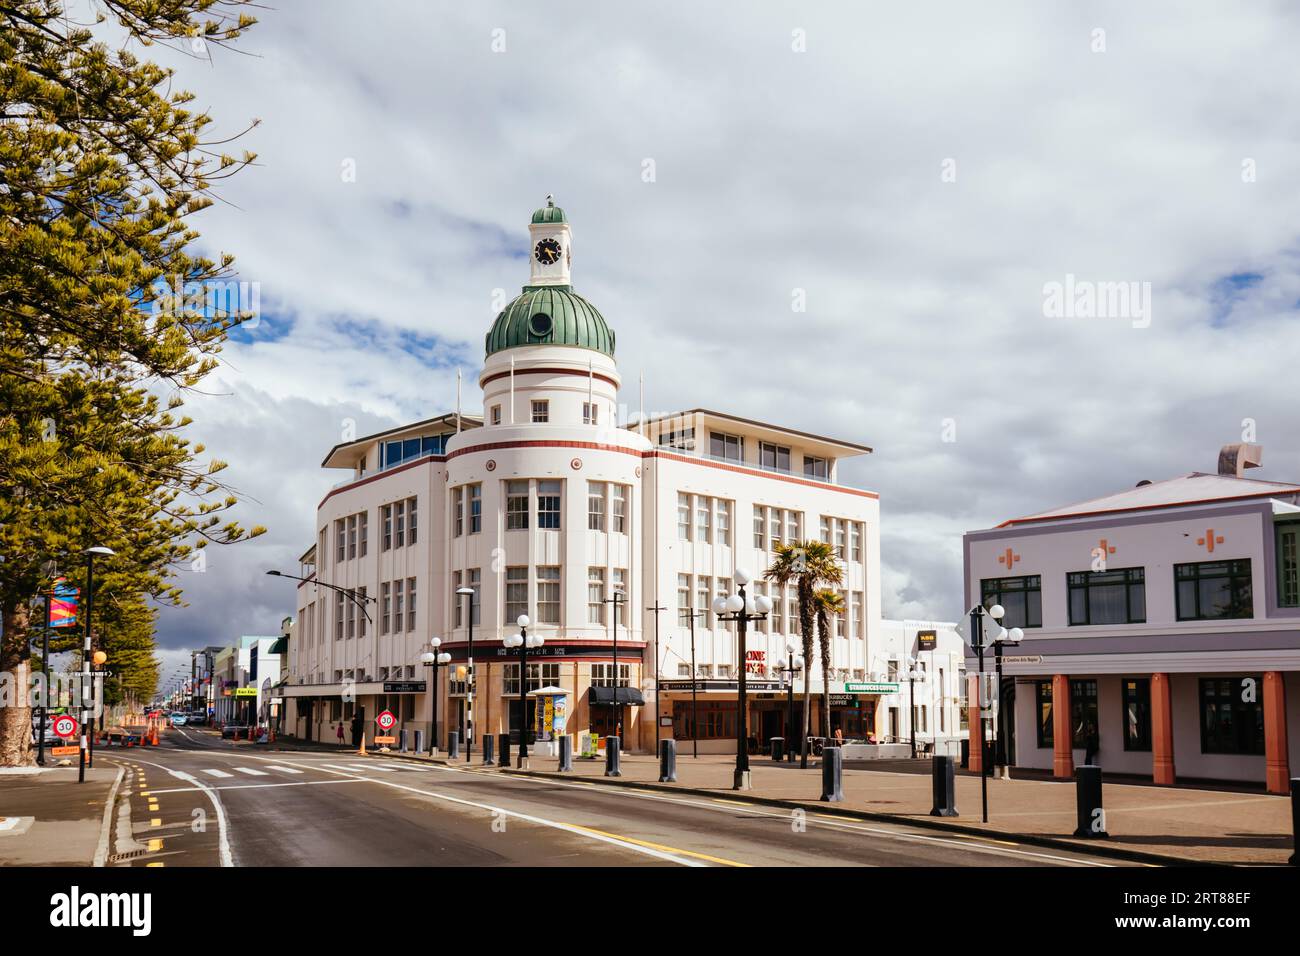 Napier, New Zealand, September 30 2017: The historic art deco architecture on an early spring morniing in Napier New Zealand Stock Photo